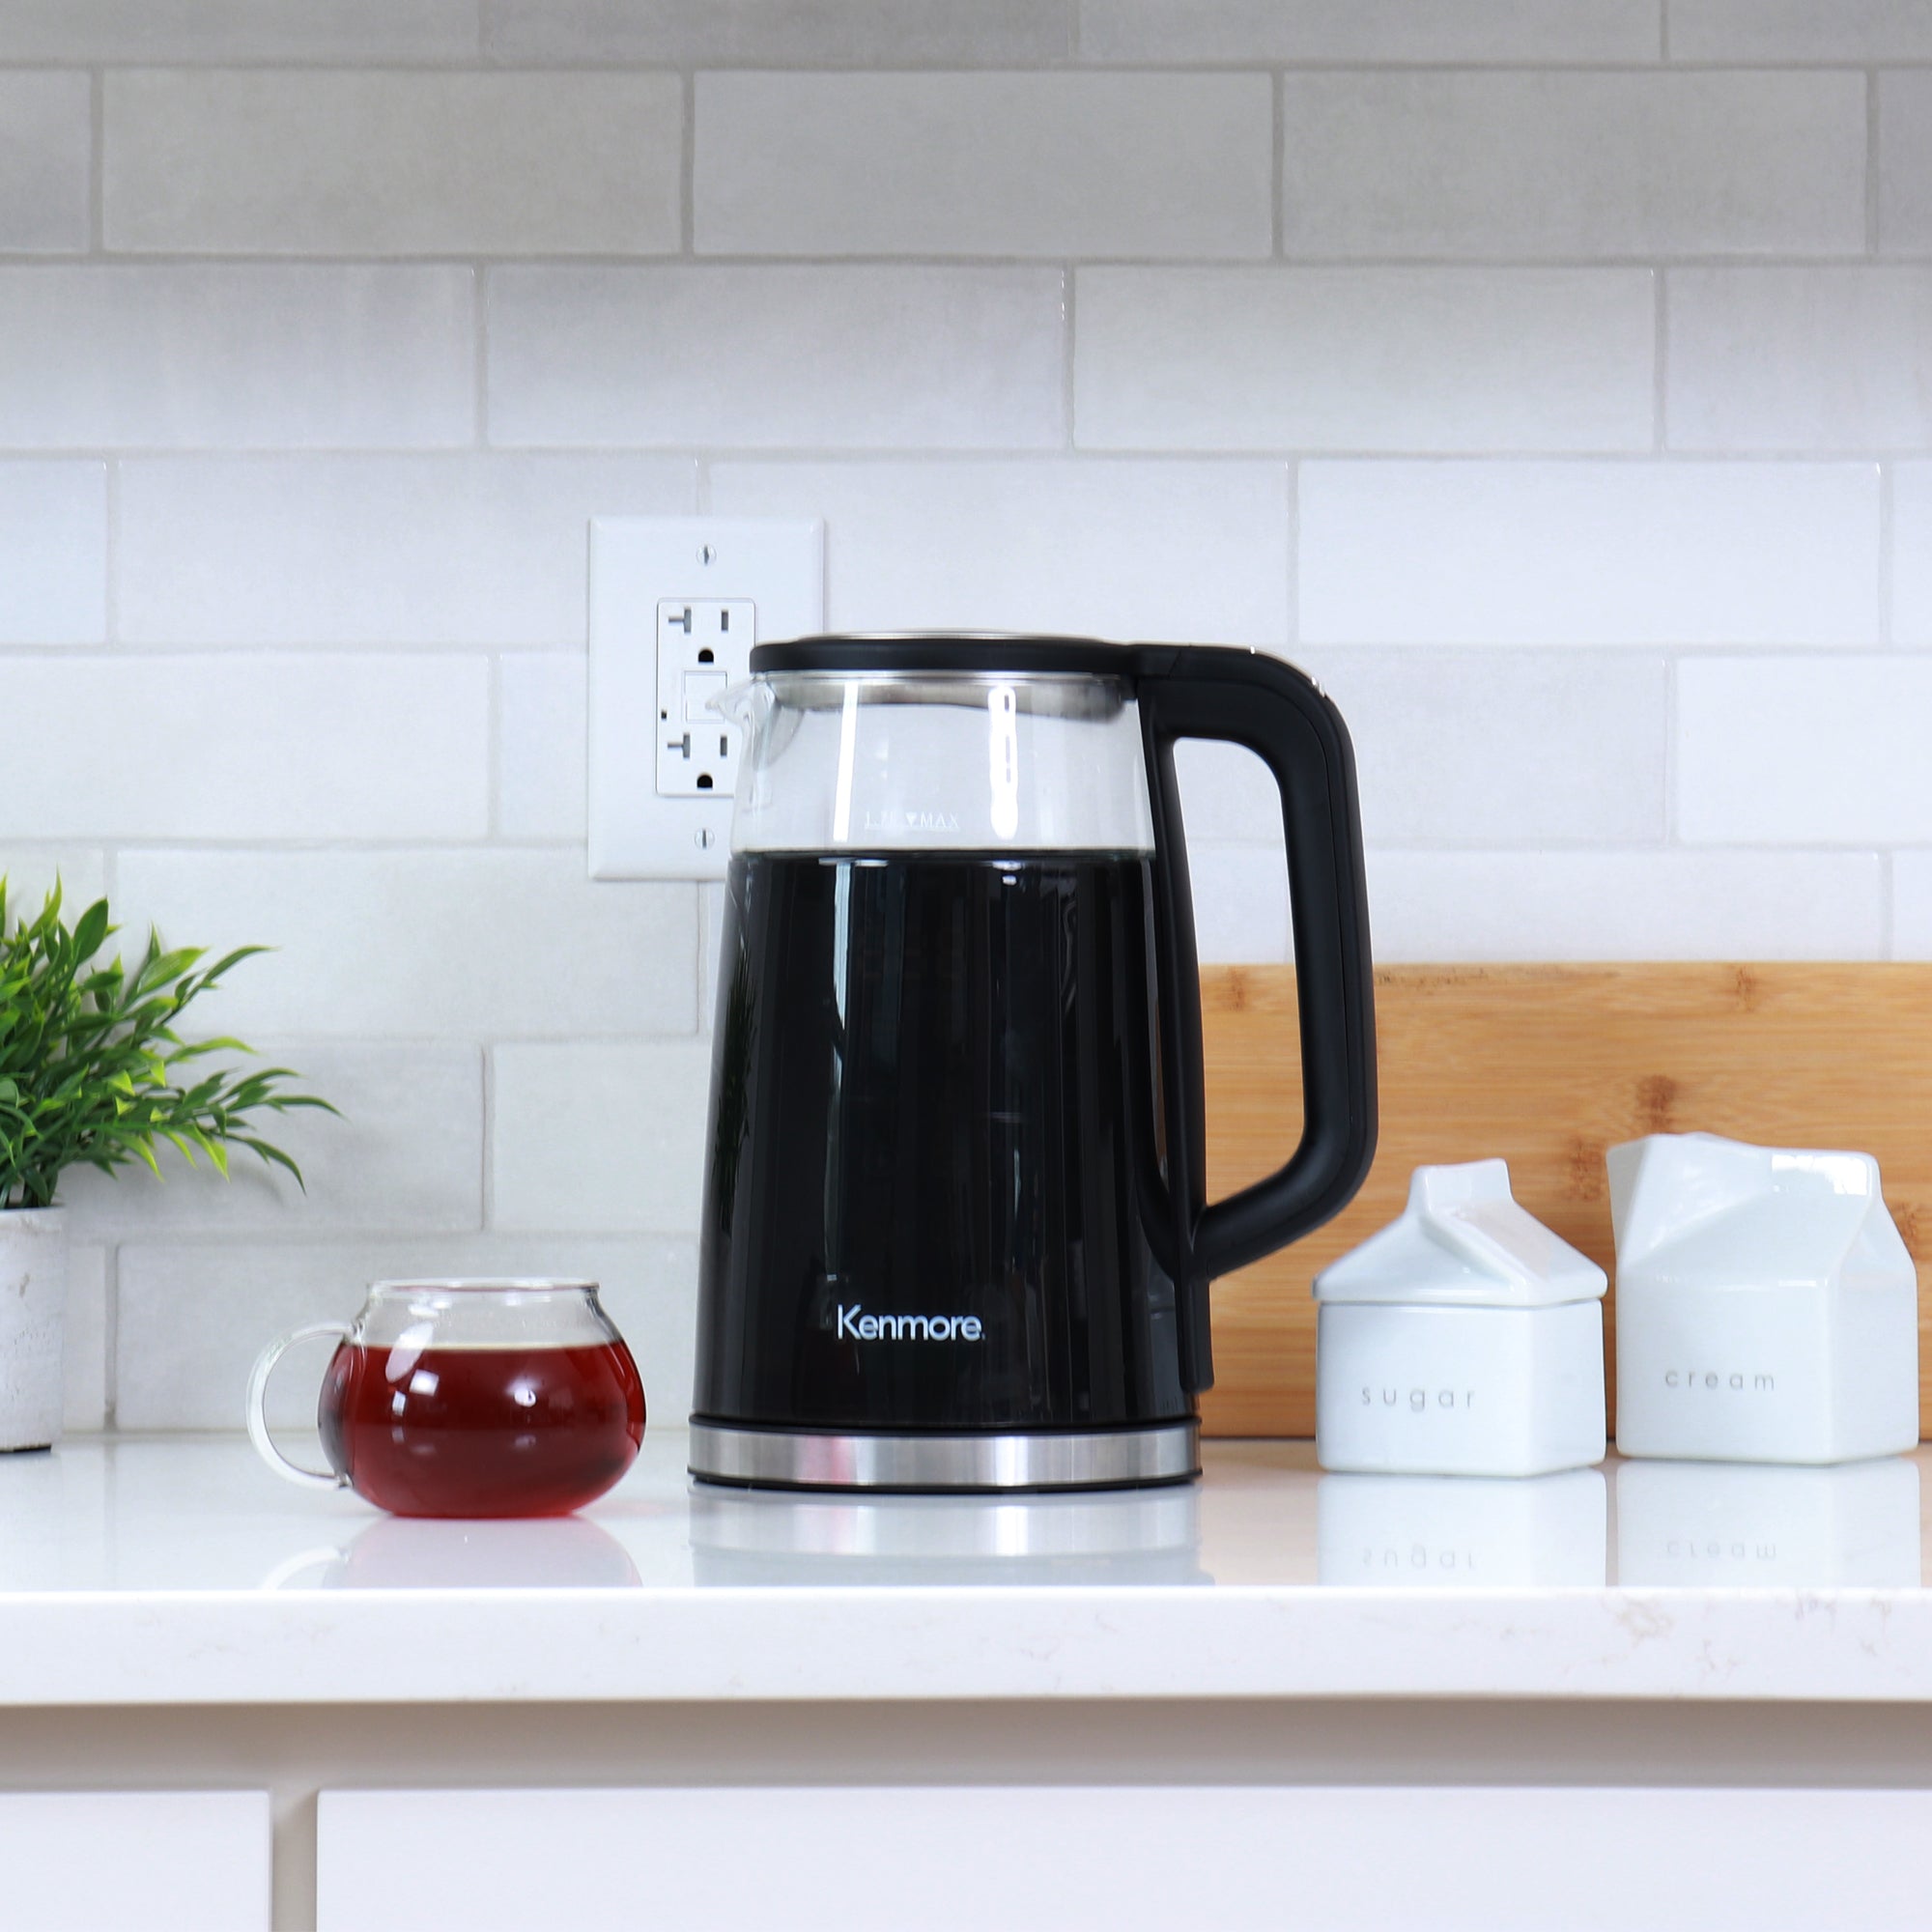 Kenmore cool-touch glass tea kettle with 4 pre-set temperatures on a white counter with a cup of tea beside it and a white tile backsplash behind